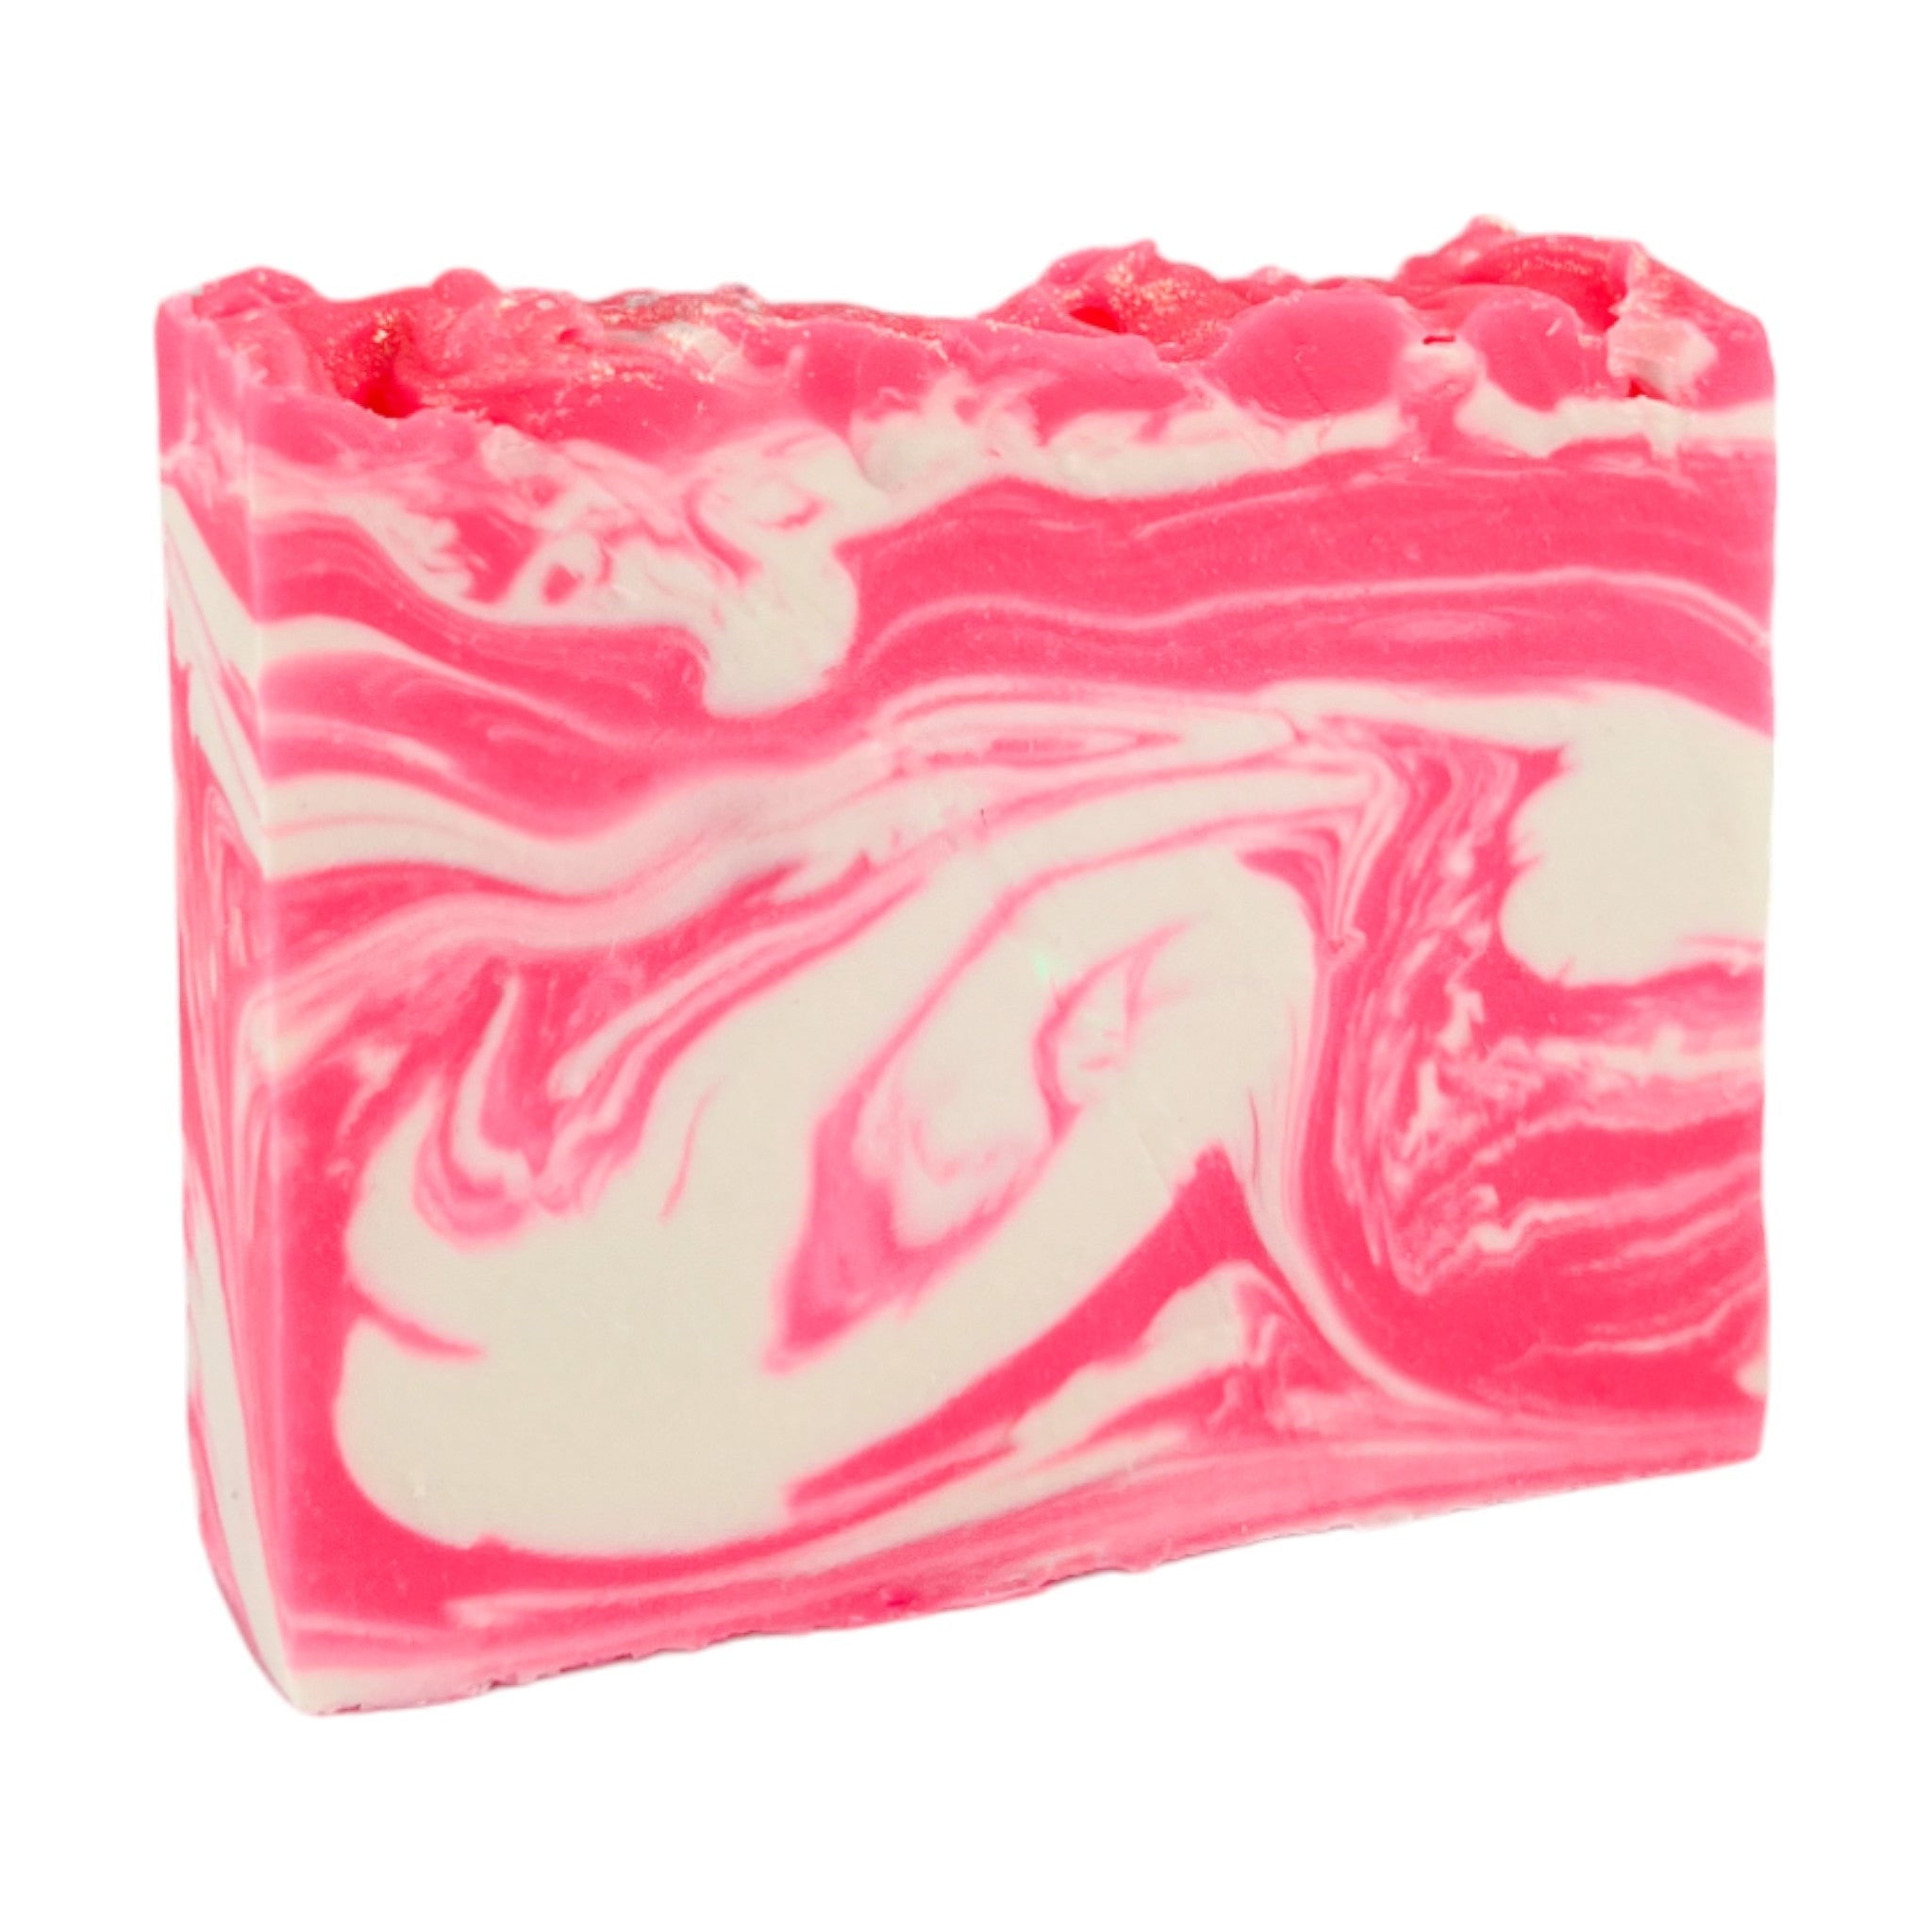 Happiness -Bar Soap - Old Town Soap Co.